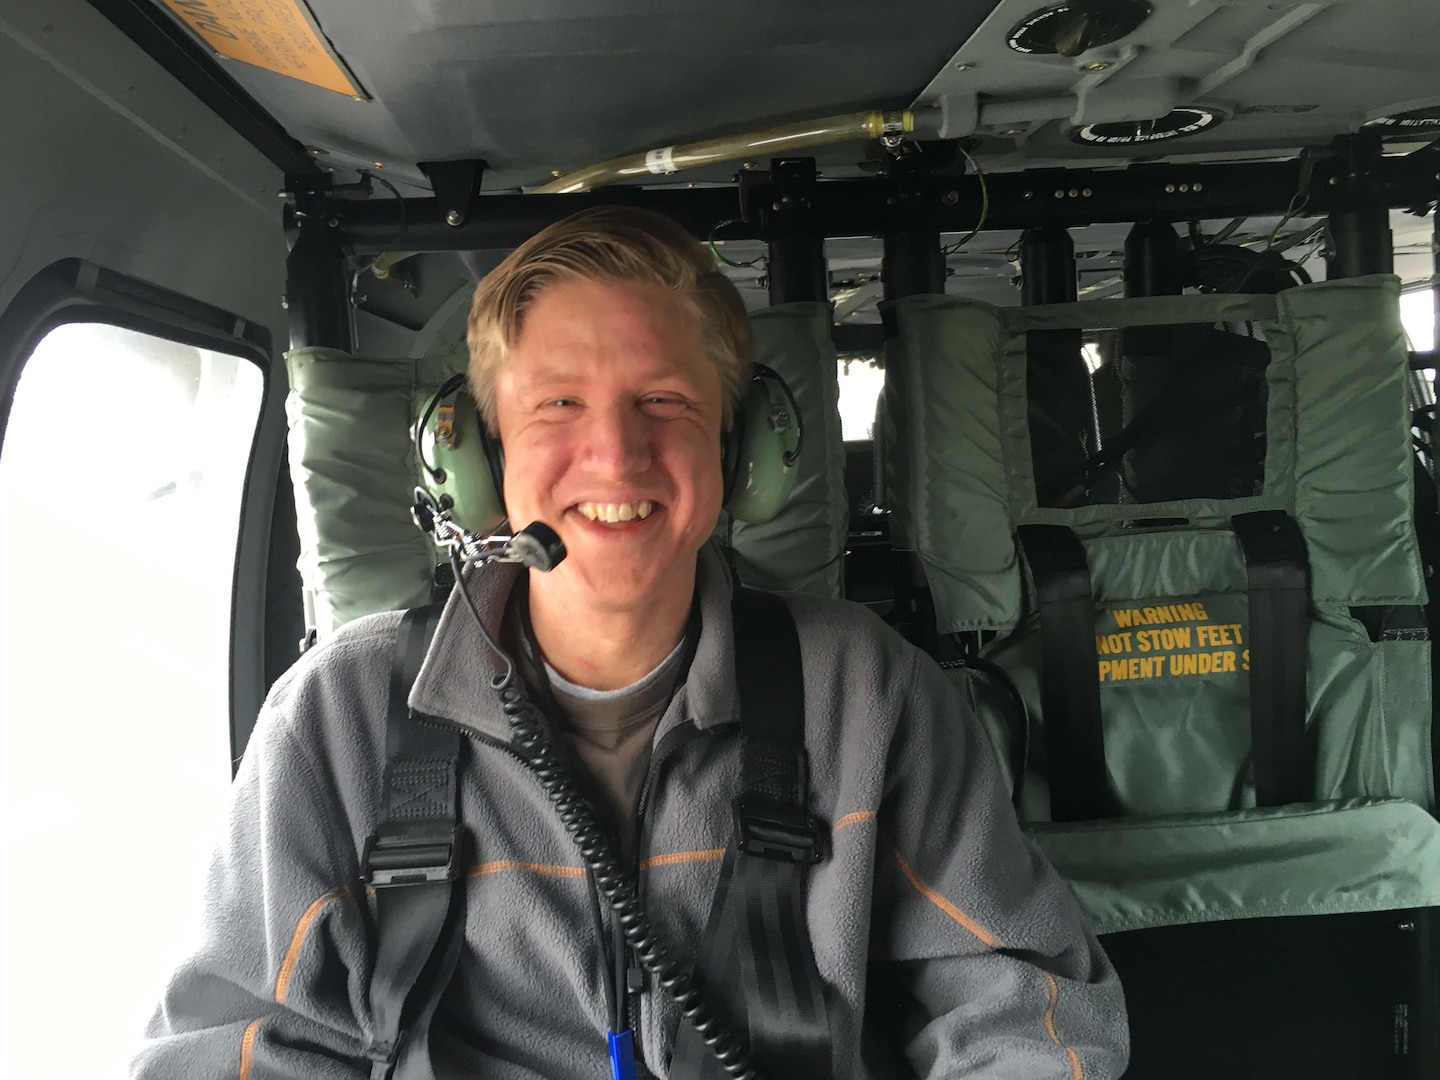 Erik Wetterhall, shown here aboard a UH-60M Blackhawk, is a customer logistics site specialist at Defense Logistics Agency Aviation at Huntsville, Alabama. Wetterhall was part of a support team traveling to Marietta Georgia April 6, 2016 to assist a Georgia National Guard unit with a fuel cell issue.